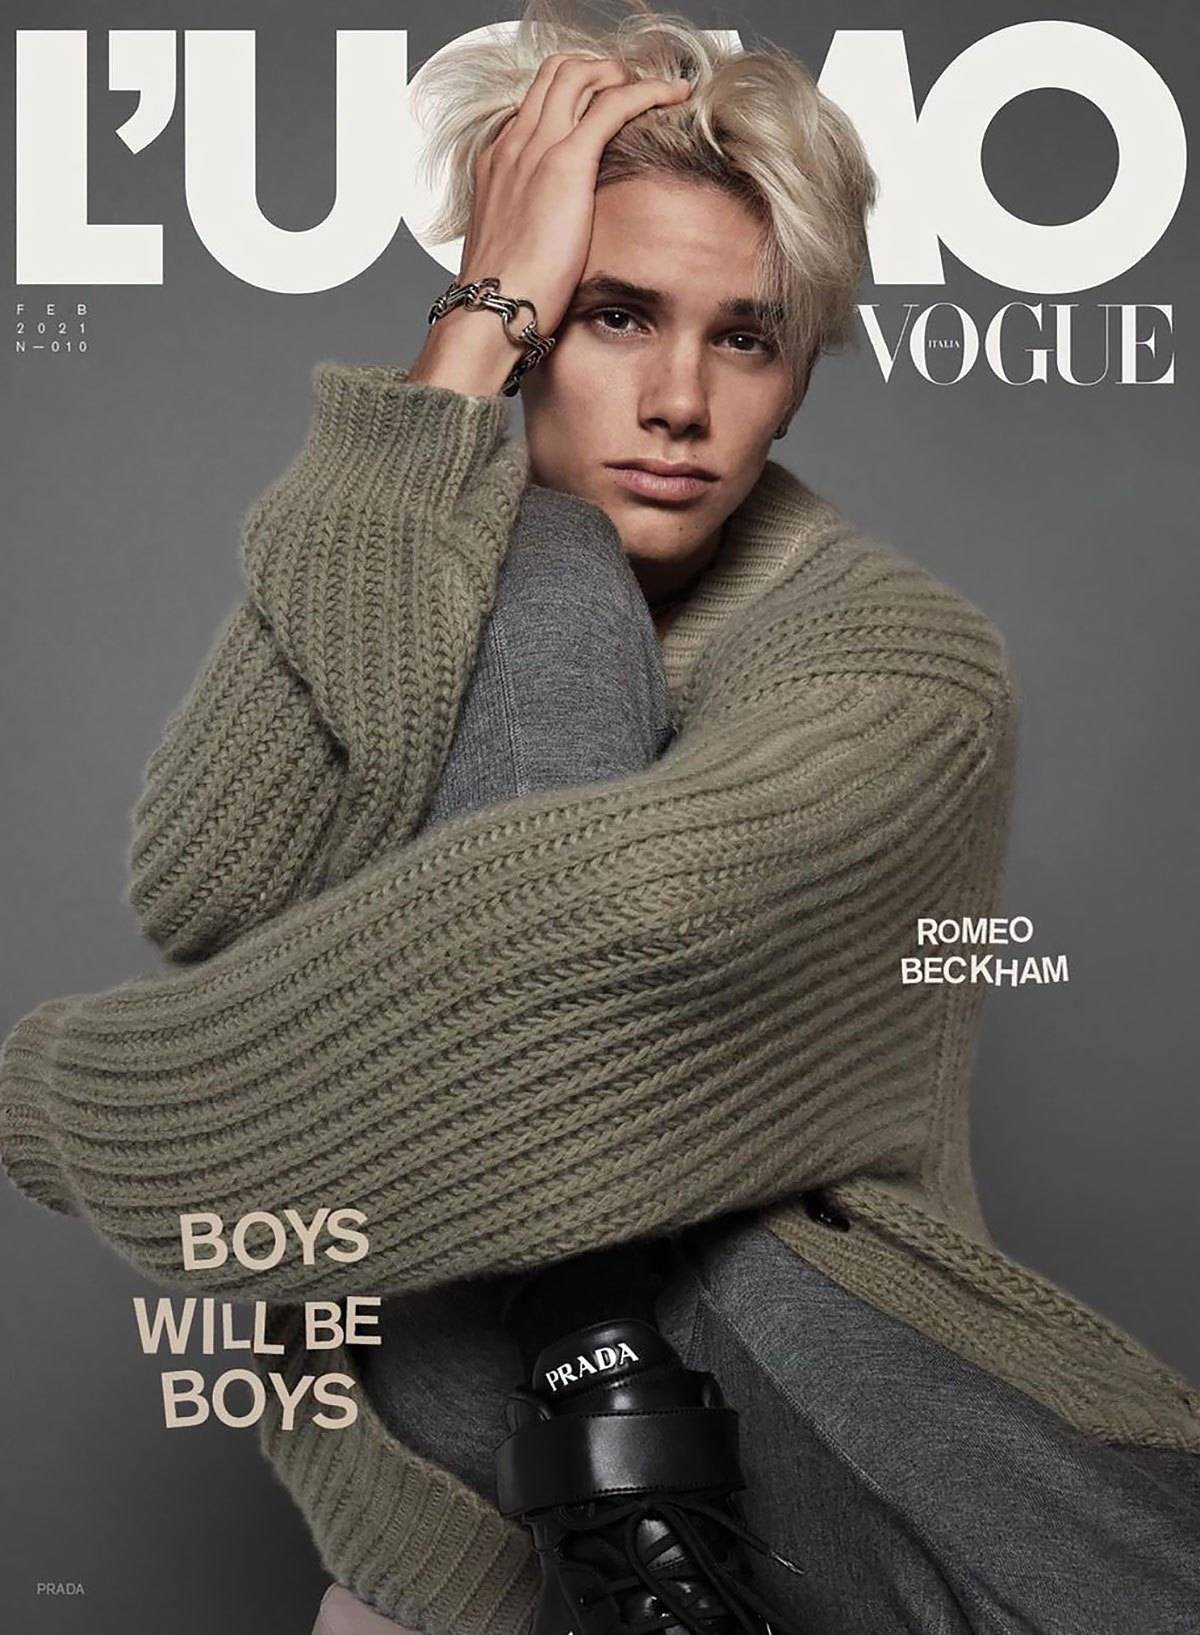 https://www.vogue.pl/uploads/repository/romeo-beckham-channels-both-his-parents-for-his-magazine-cover-debut-promo.jpg